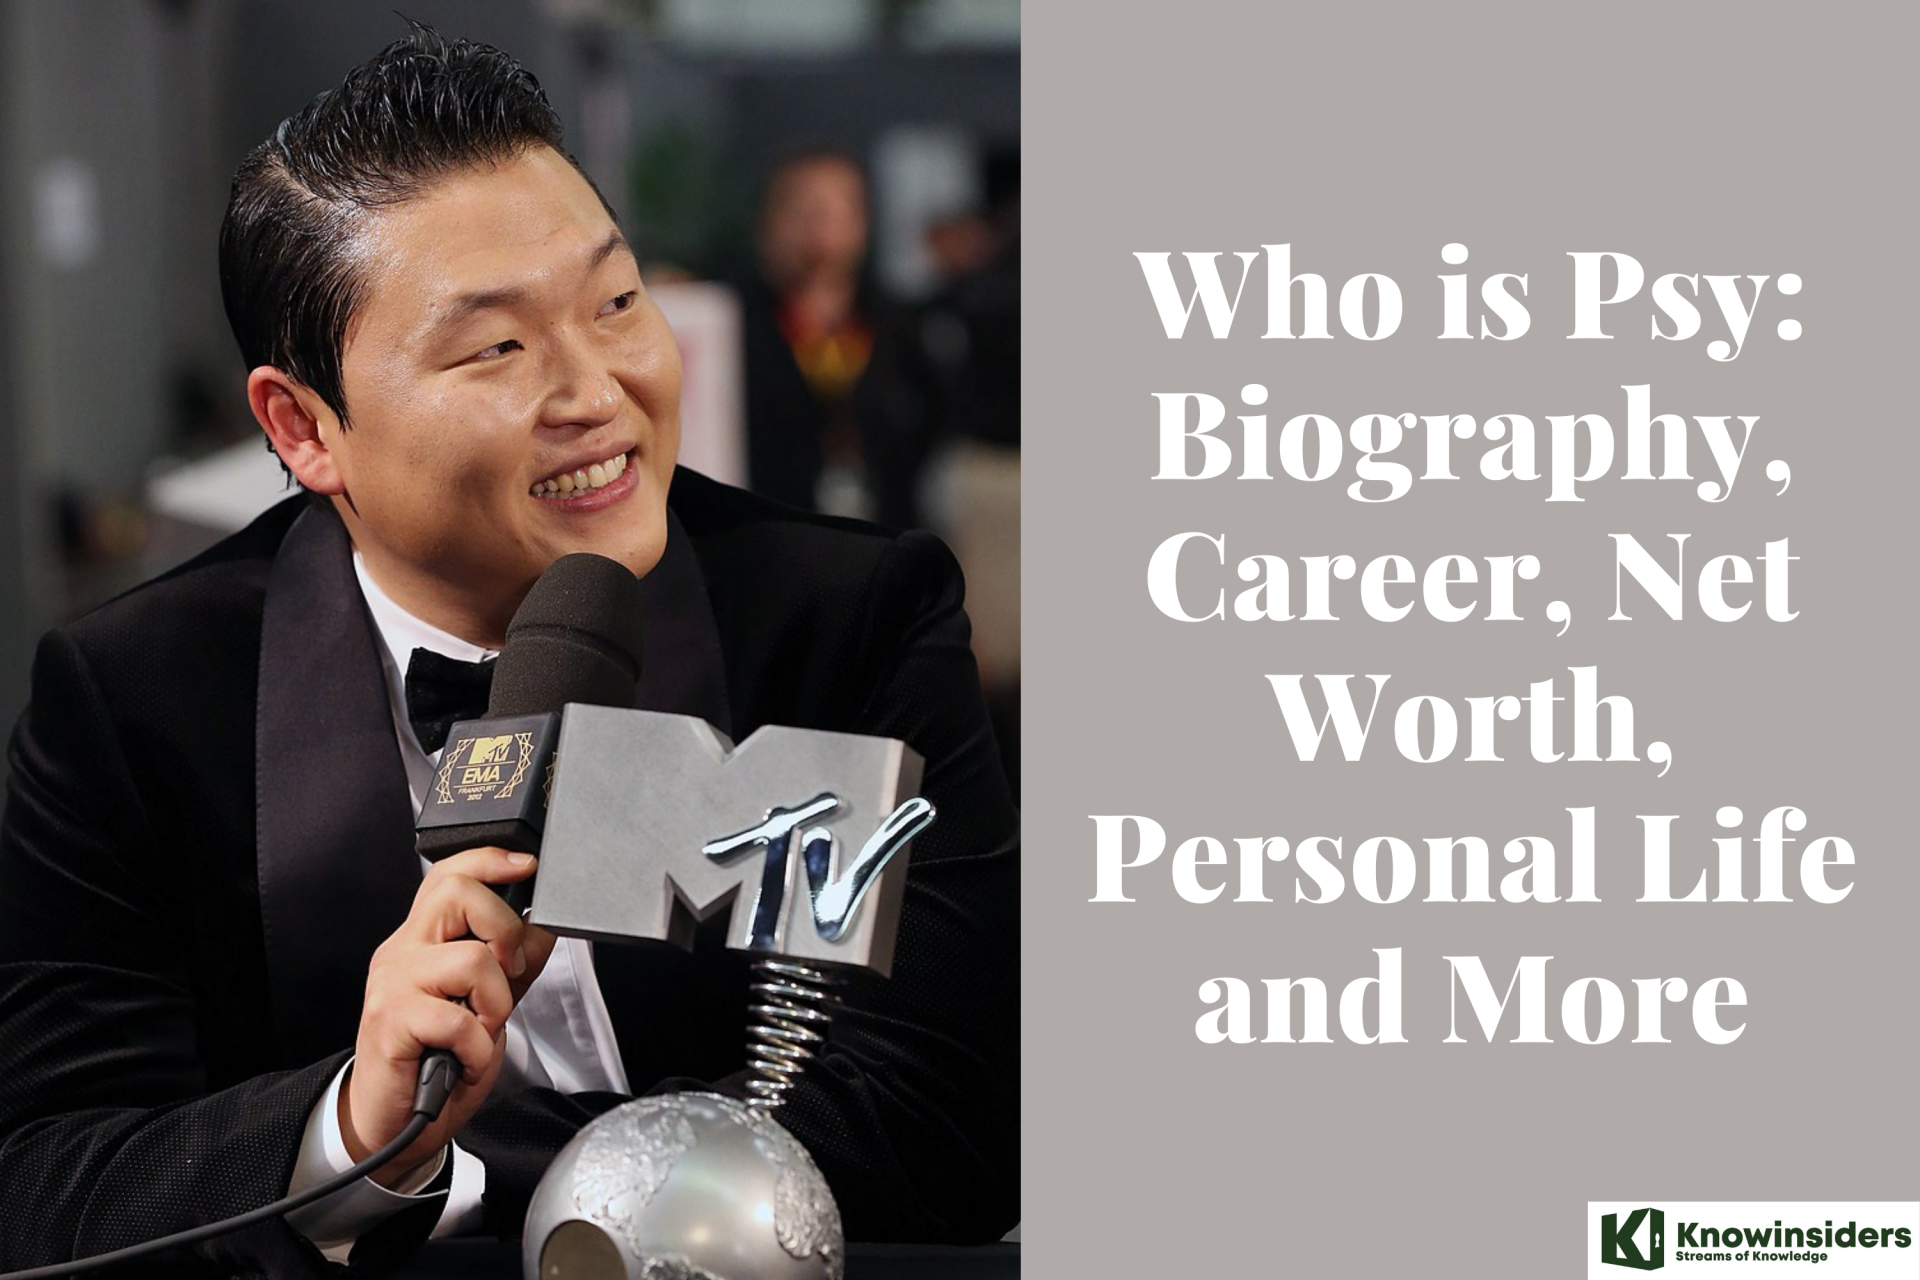 Who is Psy: Biography, Career, Net Worth, Personal Life and More